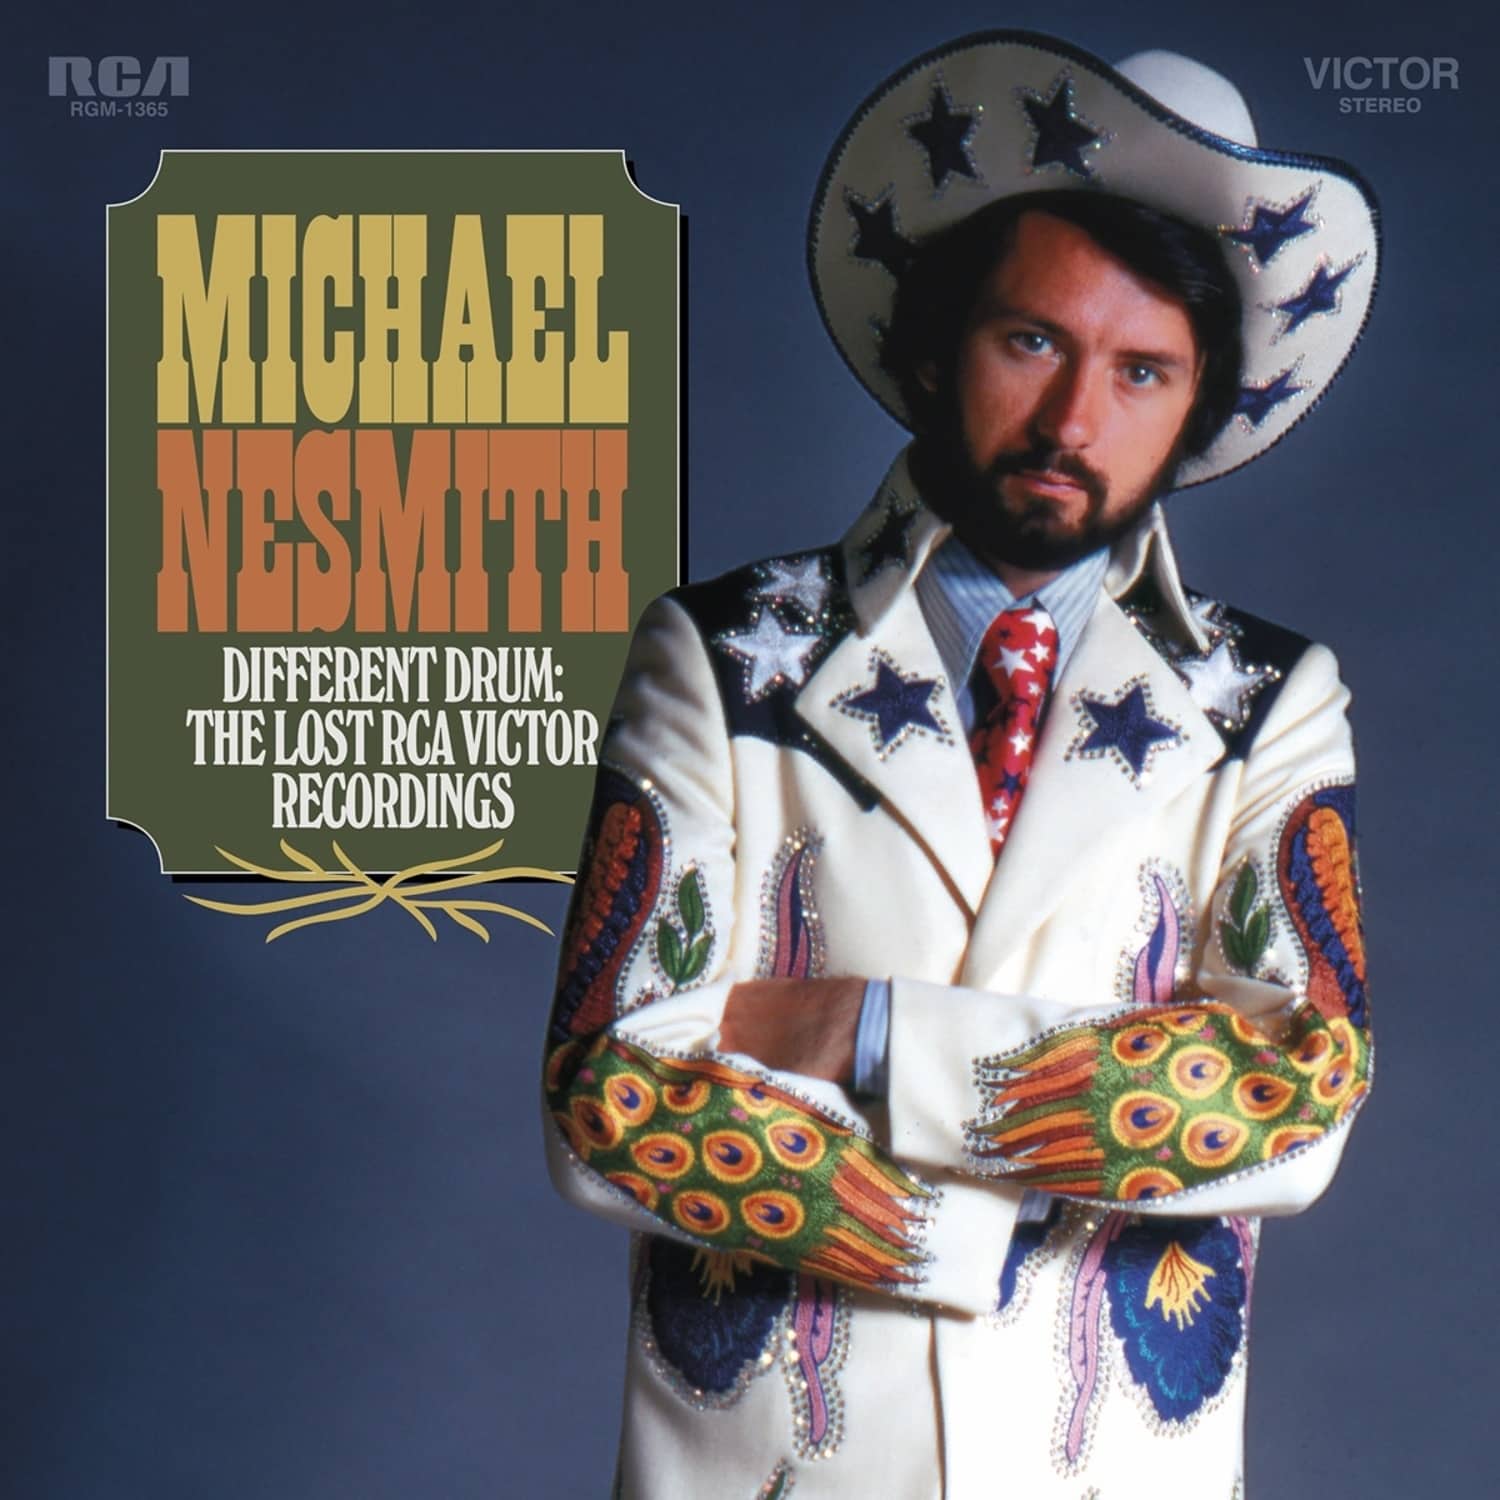 Michael Nesmith - DIFFERENT DRUM--THE LOST RCA VICTOR RECORDINGS 